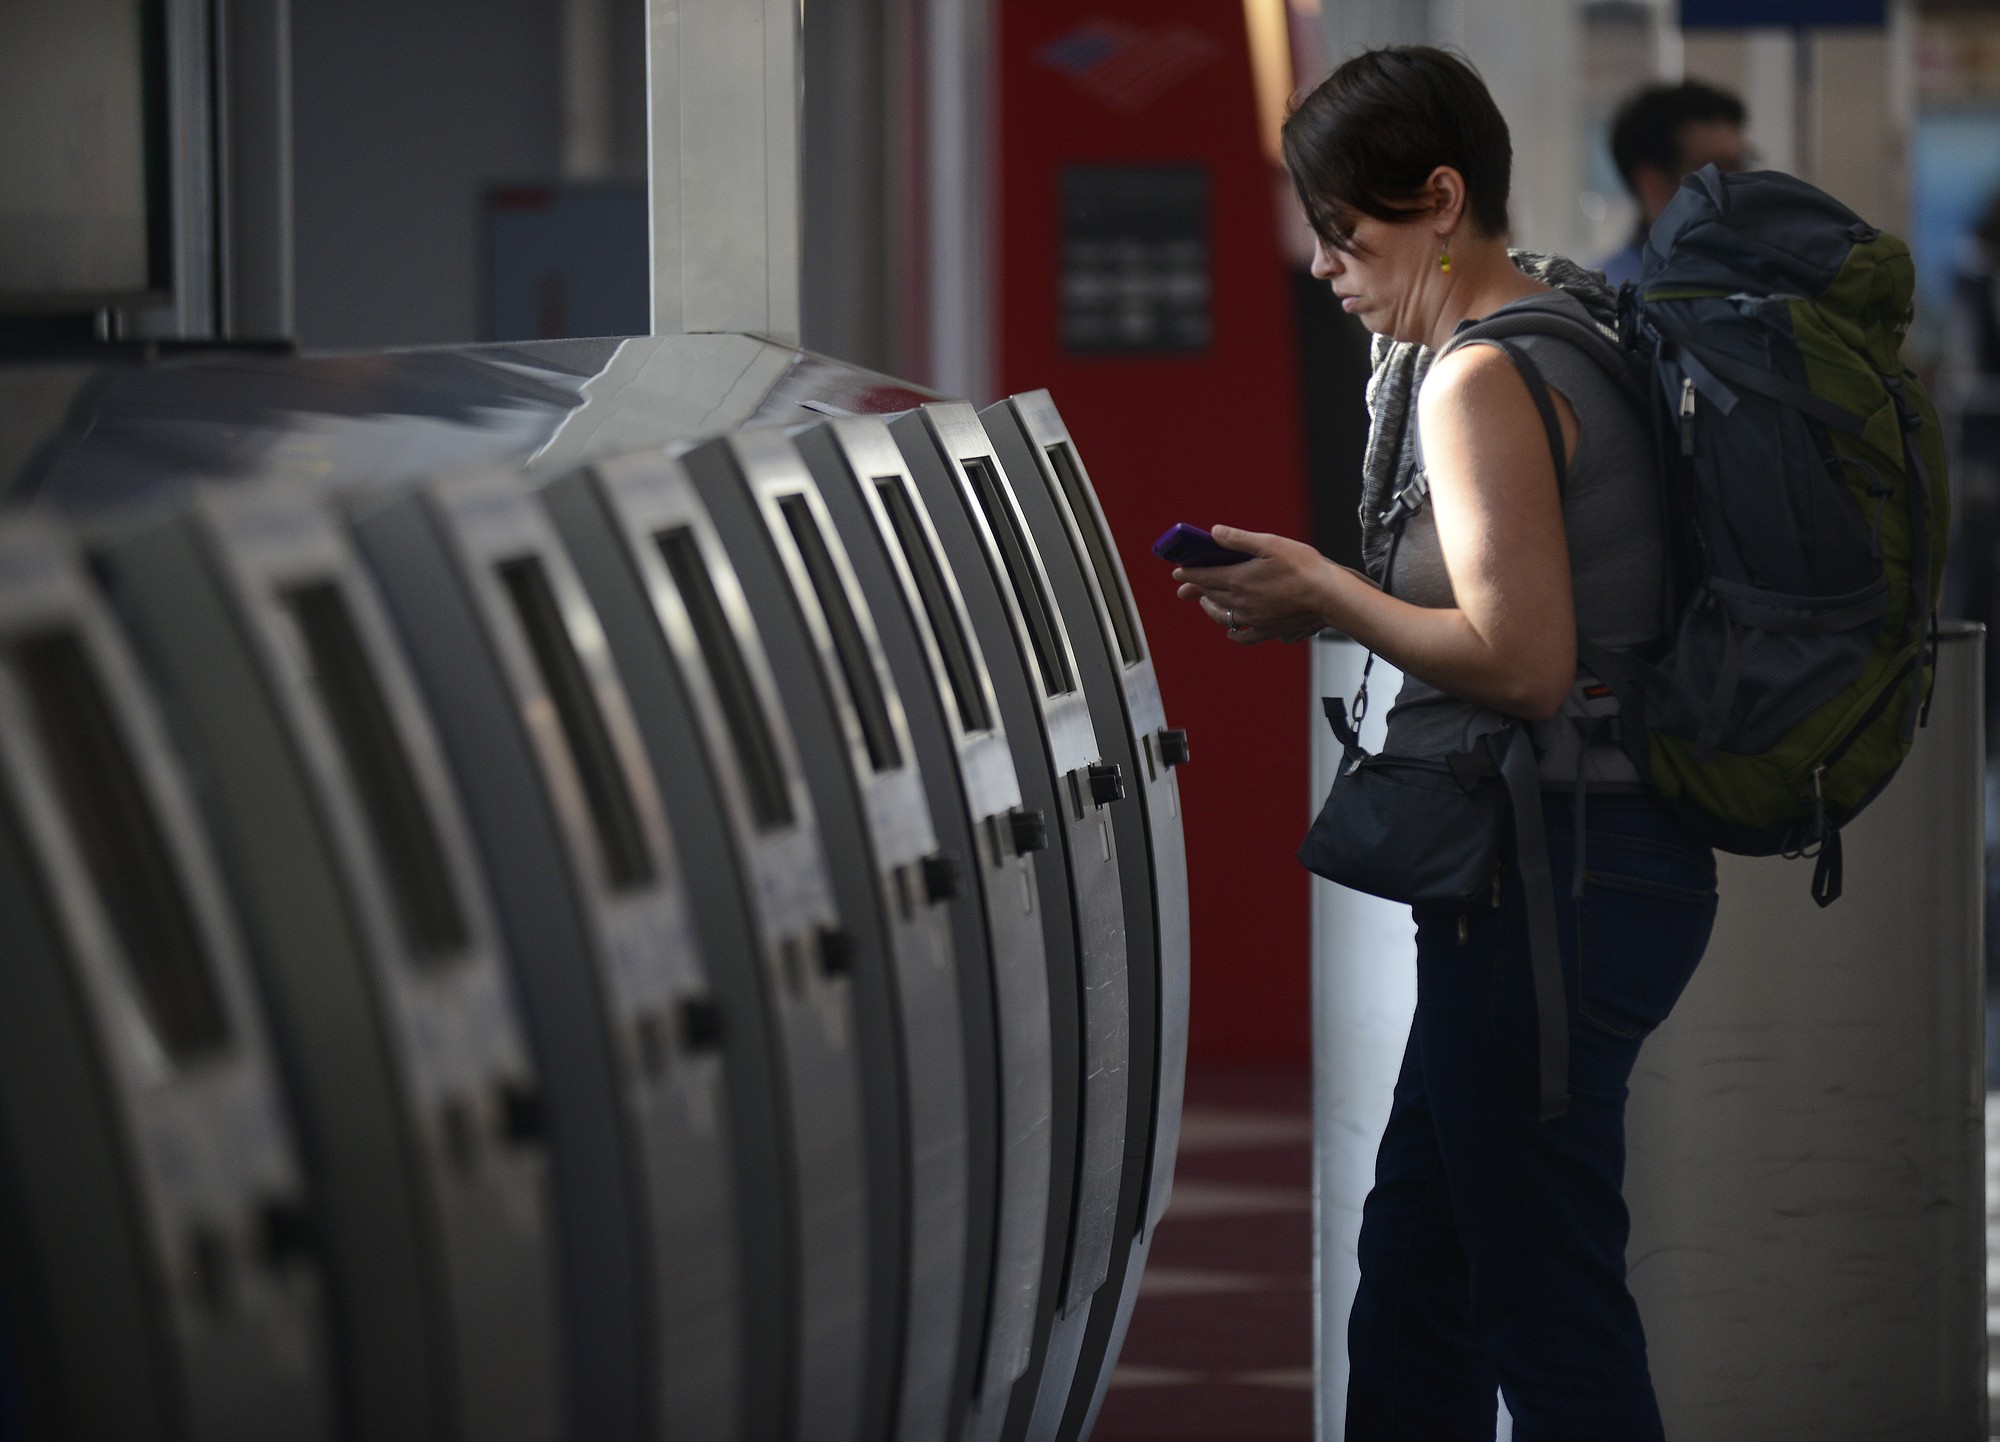 Breanne Eging checks on her flight to Greenville, S.C.,at O'Hare International Airport in Chicago on Friday.